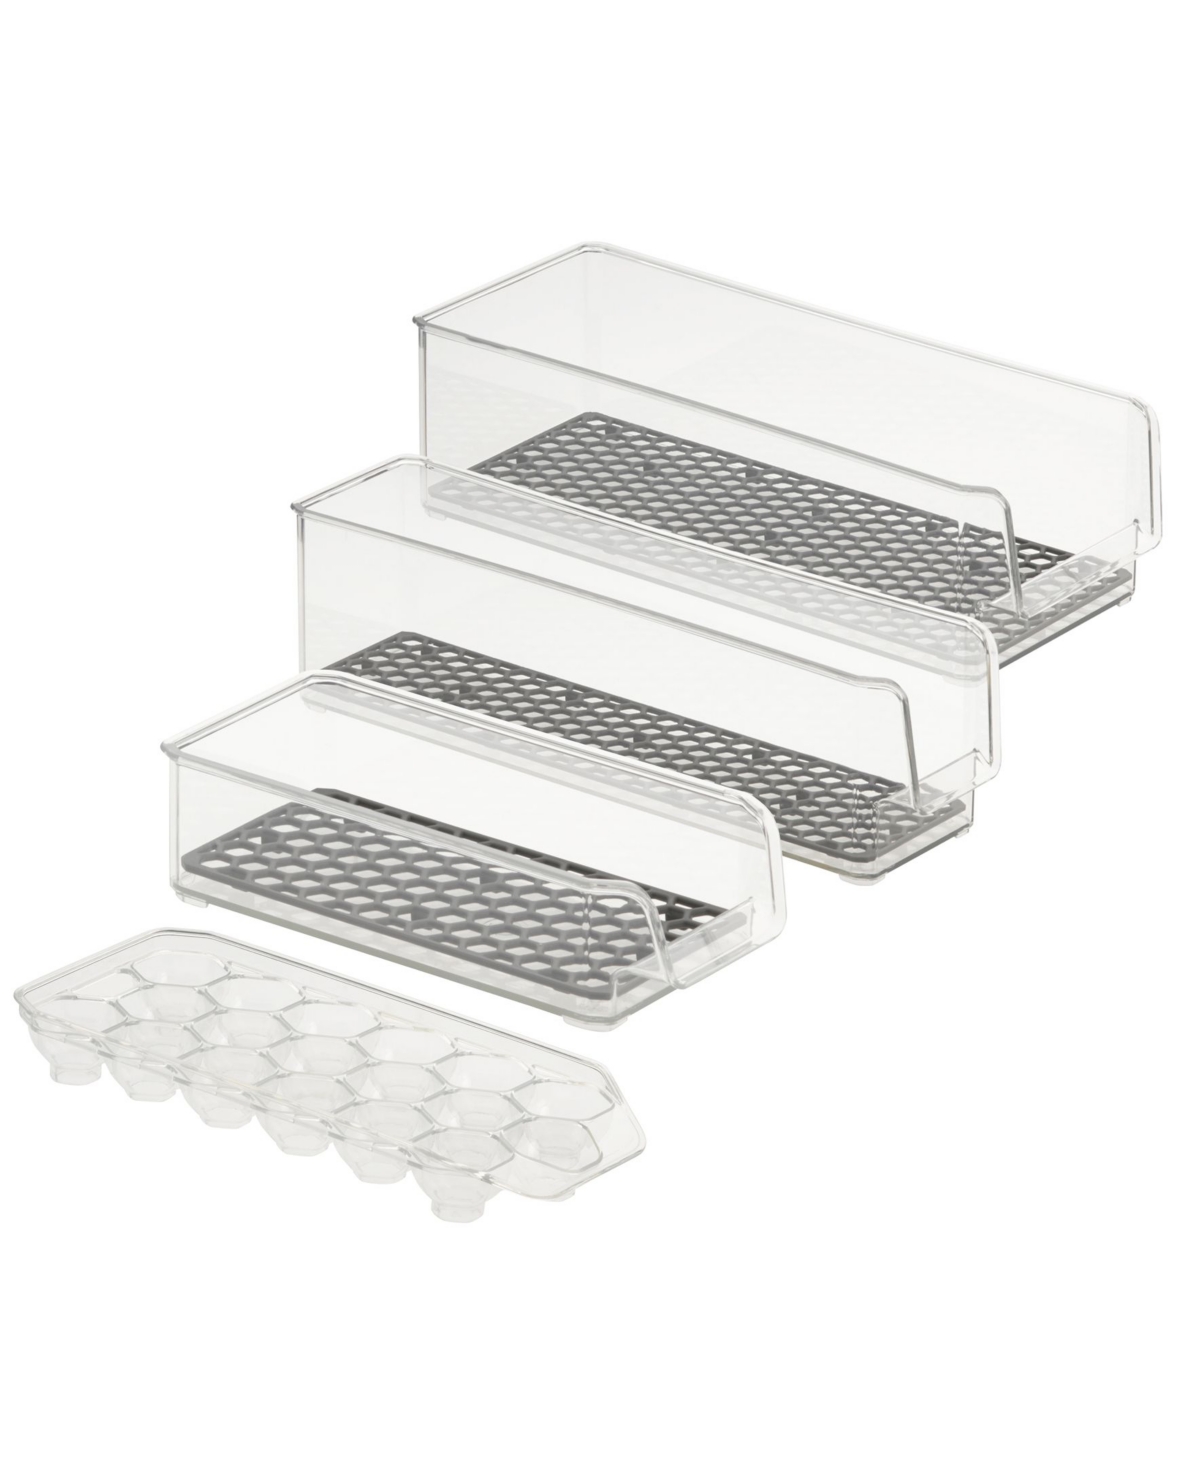 Spectrum Hexa In Fridge Organizers With 3 Stackable Refrigerator Bins And Egg Storage Tray Set, 4 Piece In Clear And Dark Gray